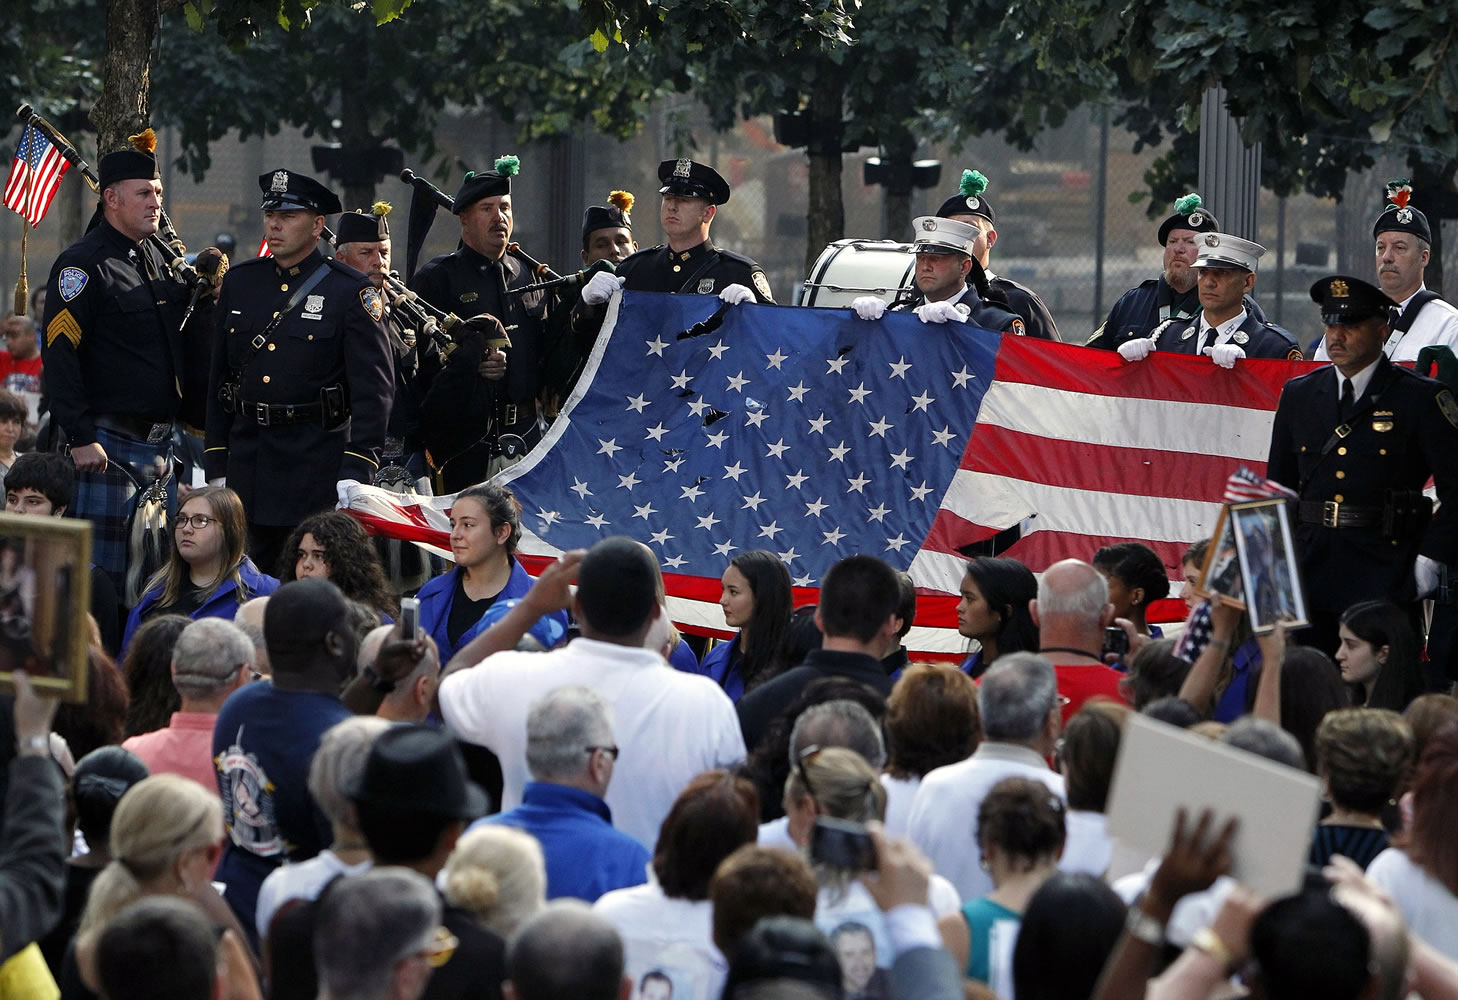 The World Trade Center Flag is presented as friends and relatives of the victims of the 9/11 terrorist attacks gather at the National September 11 Memorial at the World Trade Center site Wednesday for a ceremony marking the 12th anniversary of the attacks in New York.